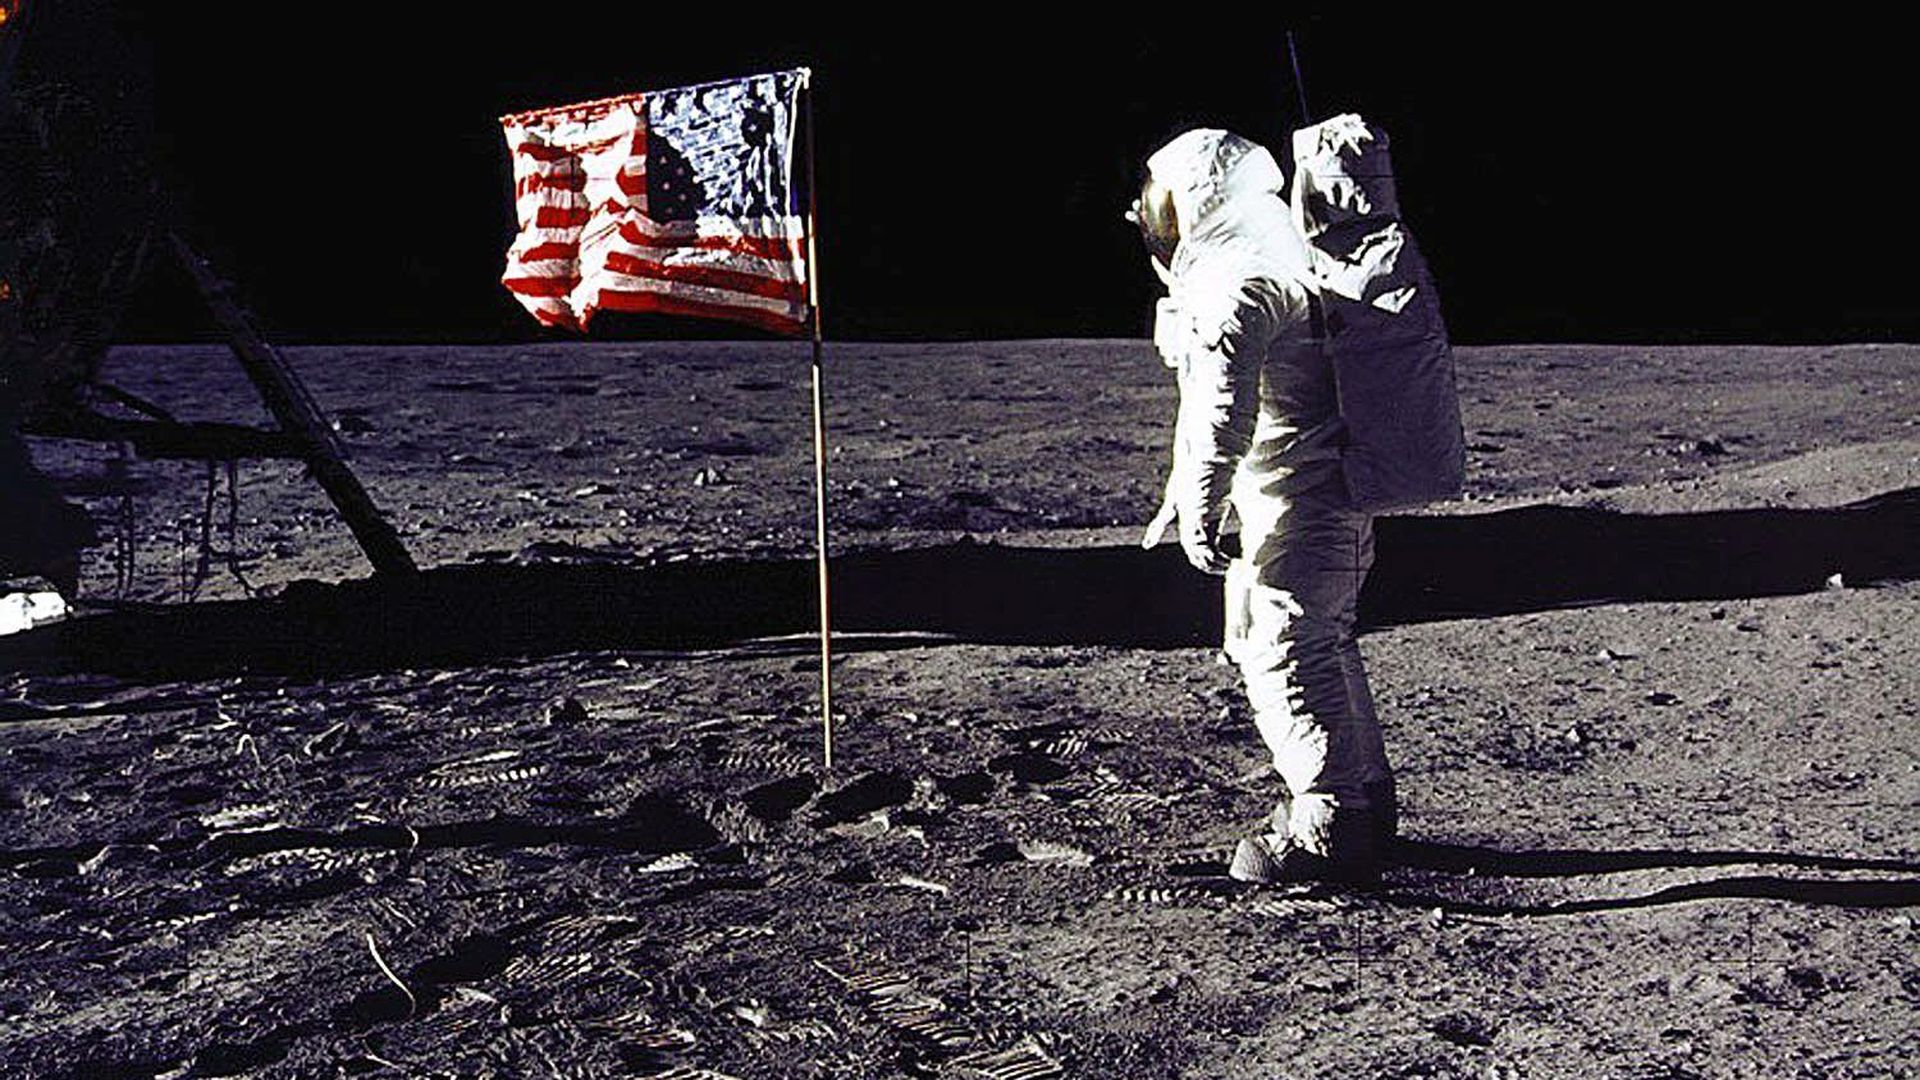 This 20 July 1969 file photo released by NASA shows astronaut Edwin E. "Buzz" Aldrin, Jr. saluting the US flag on the surface of the Moon during the Apollo 11 lunar mission.